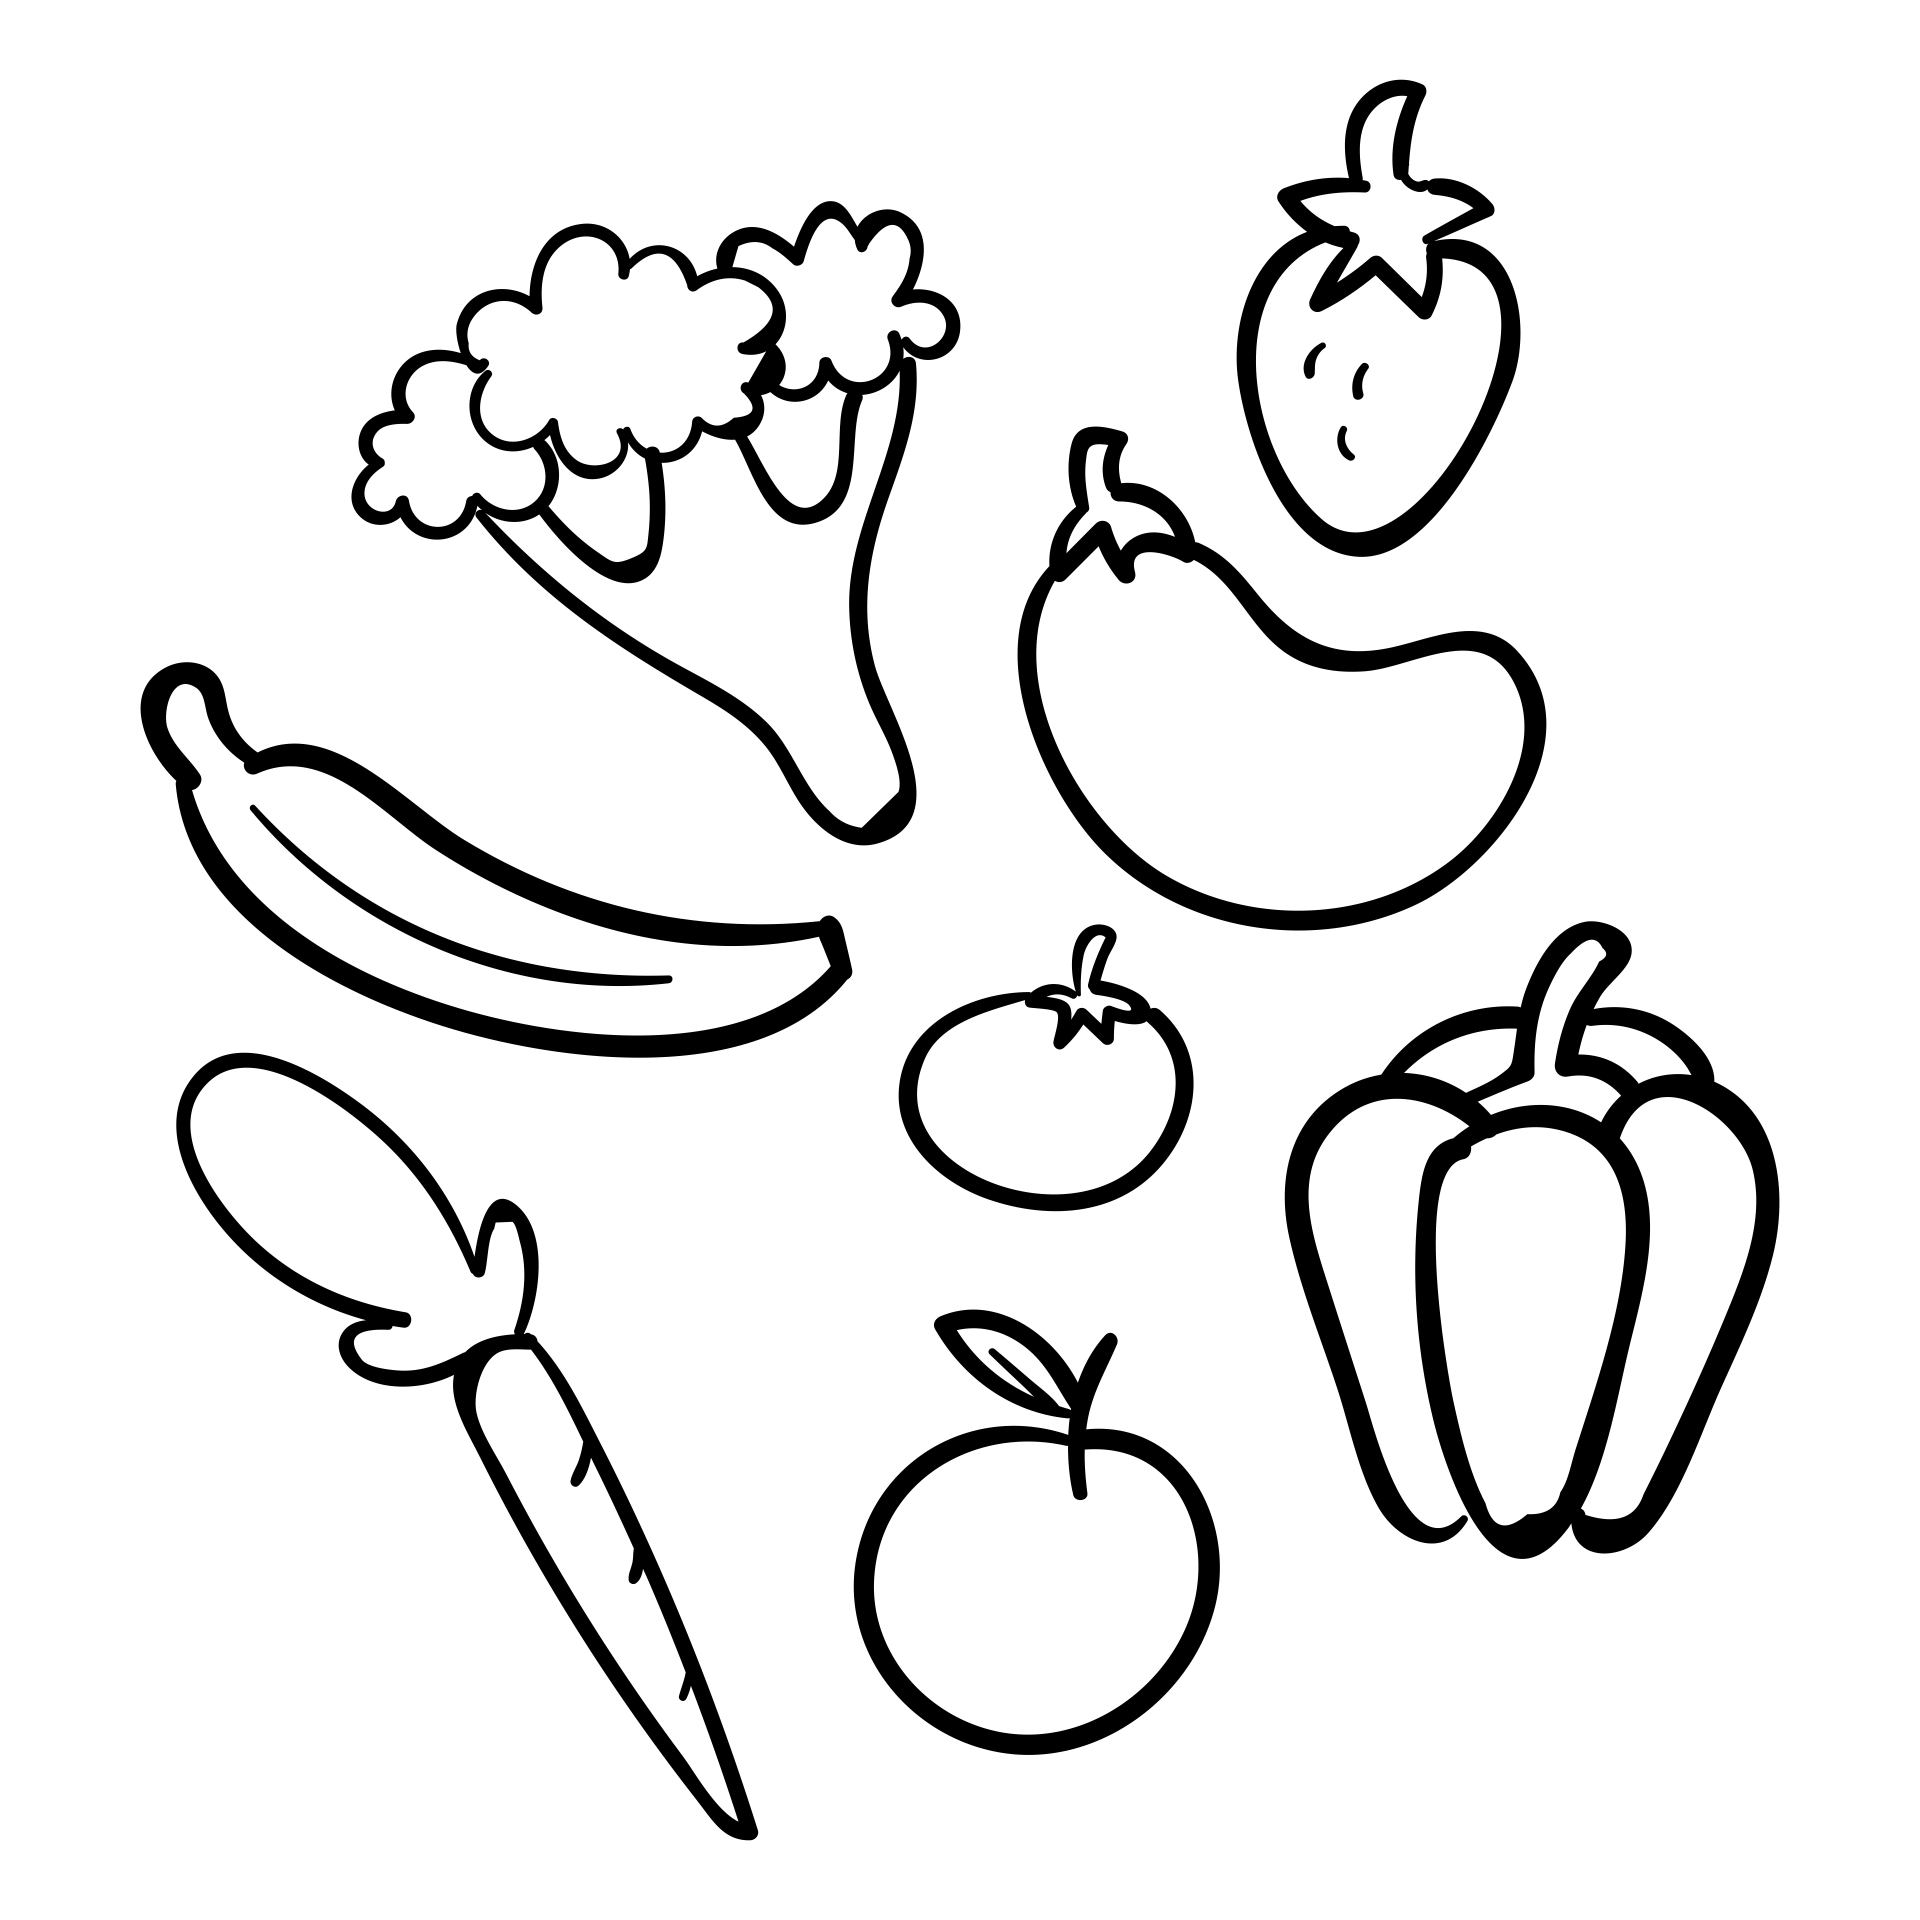 Printable Fruits And Vegetables